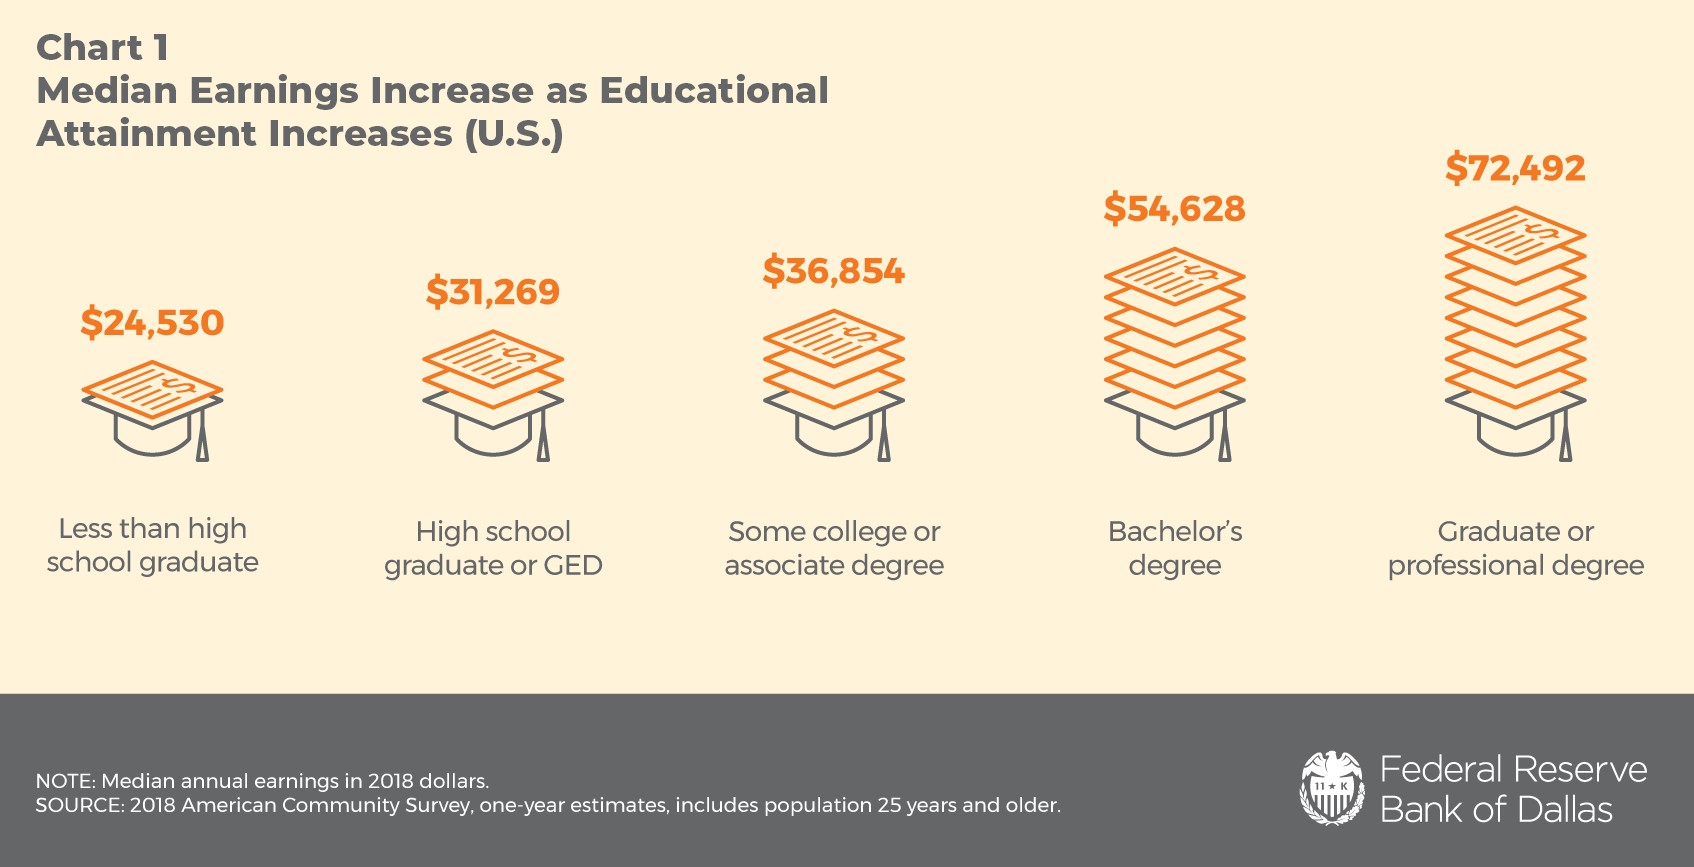 Chart 1: Median Earnings Increase as Educational Attainment Increases (U.S.)